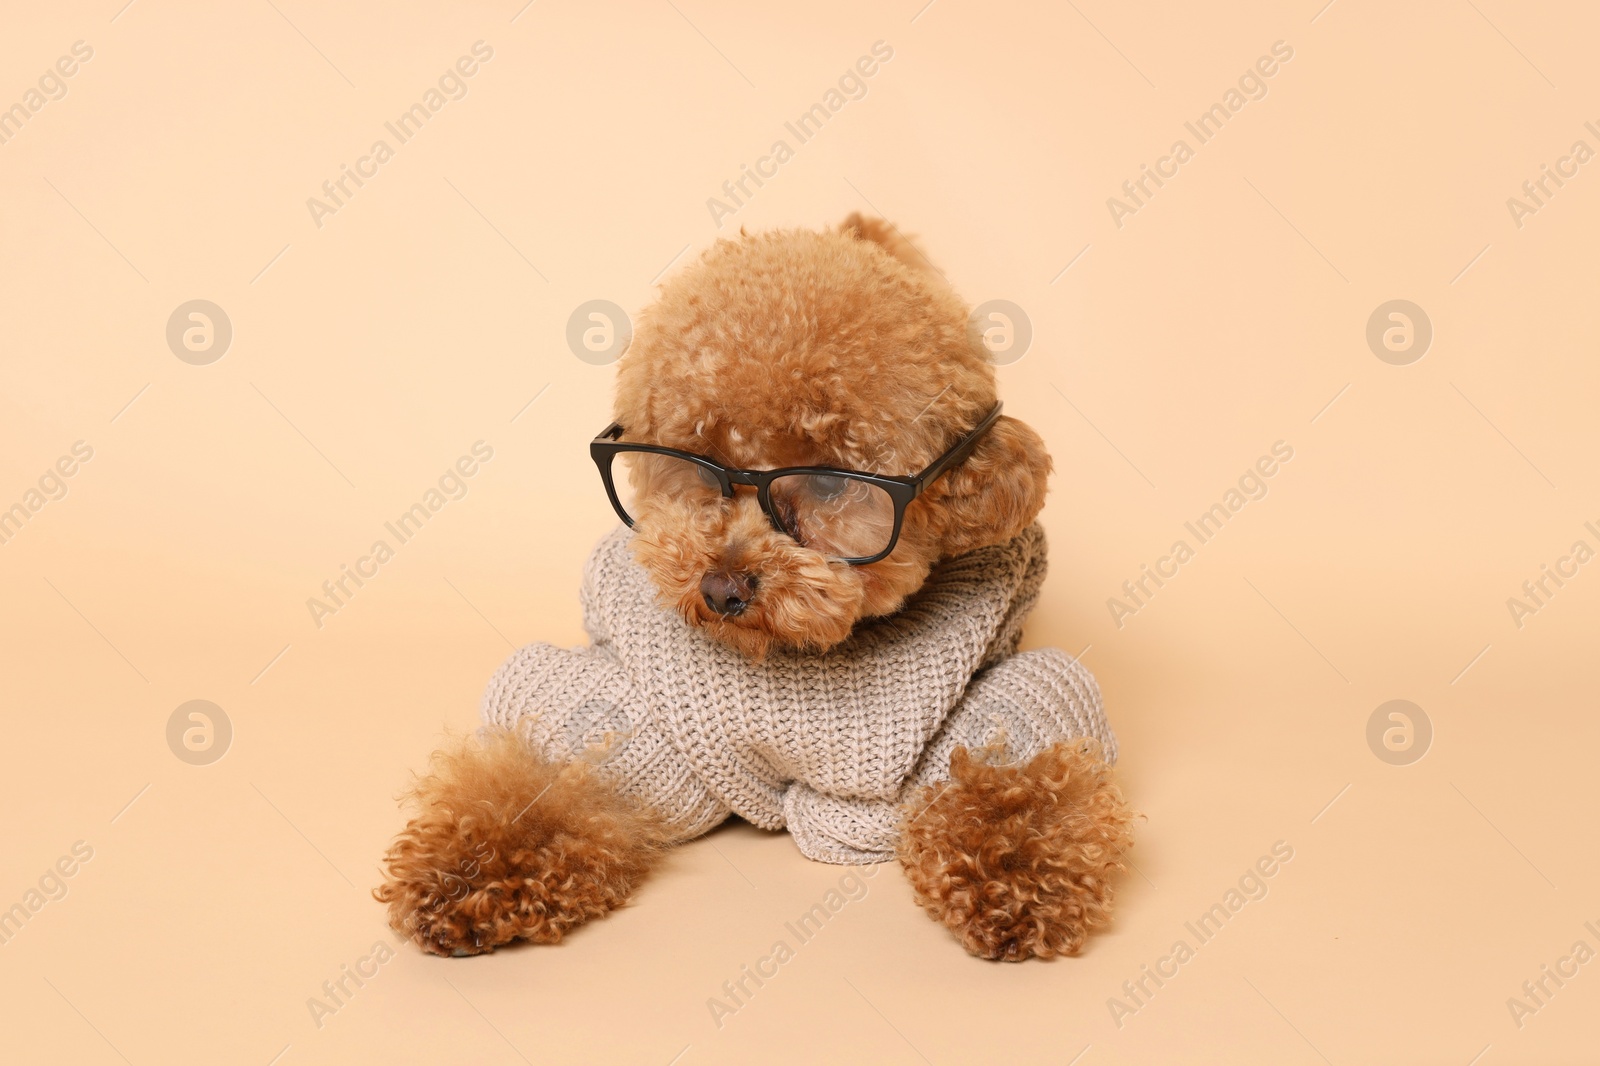 Photo of Cute Maltipoo dog in knitted sweater and glasses on beige background